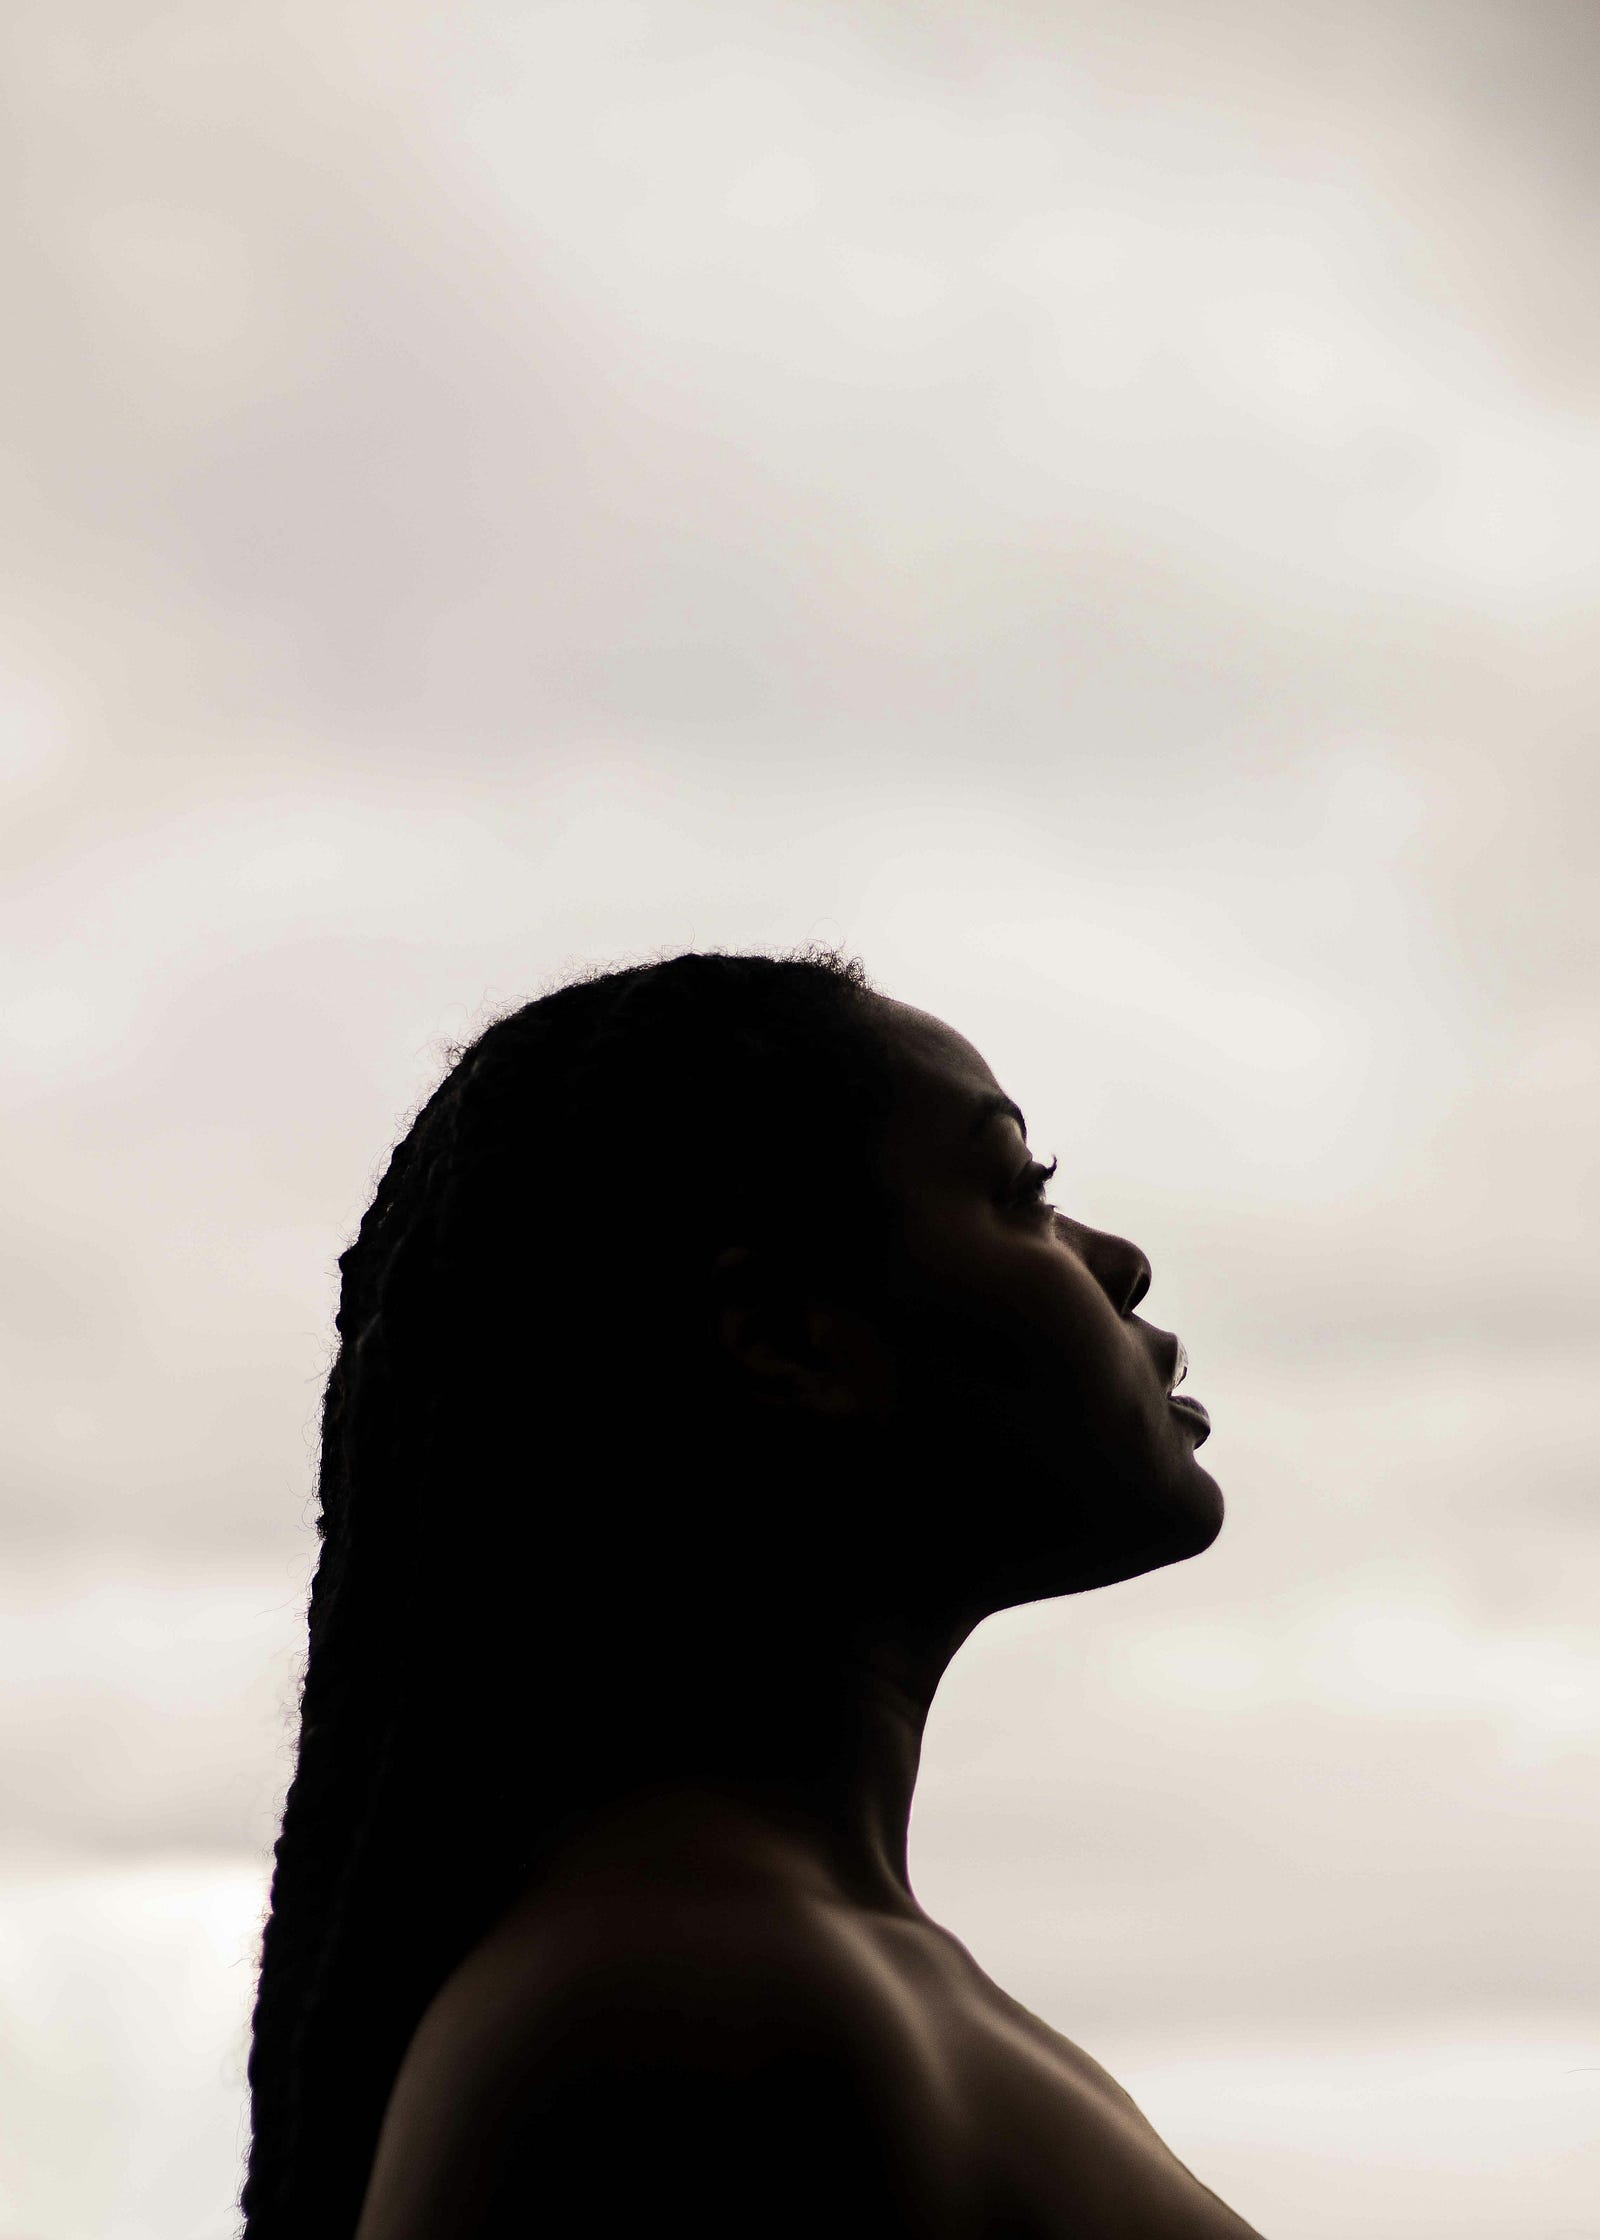 A young black woman in profile/silhouette. Coffee appears to lower ovarian cancer risk.